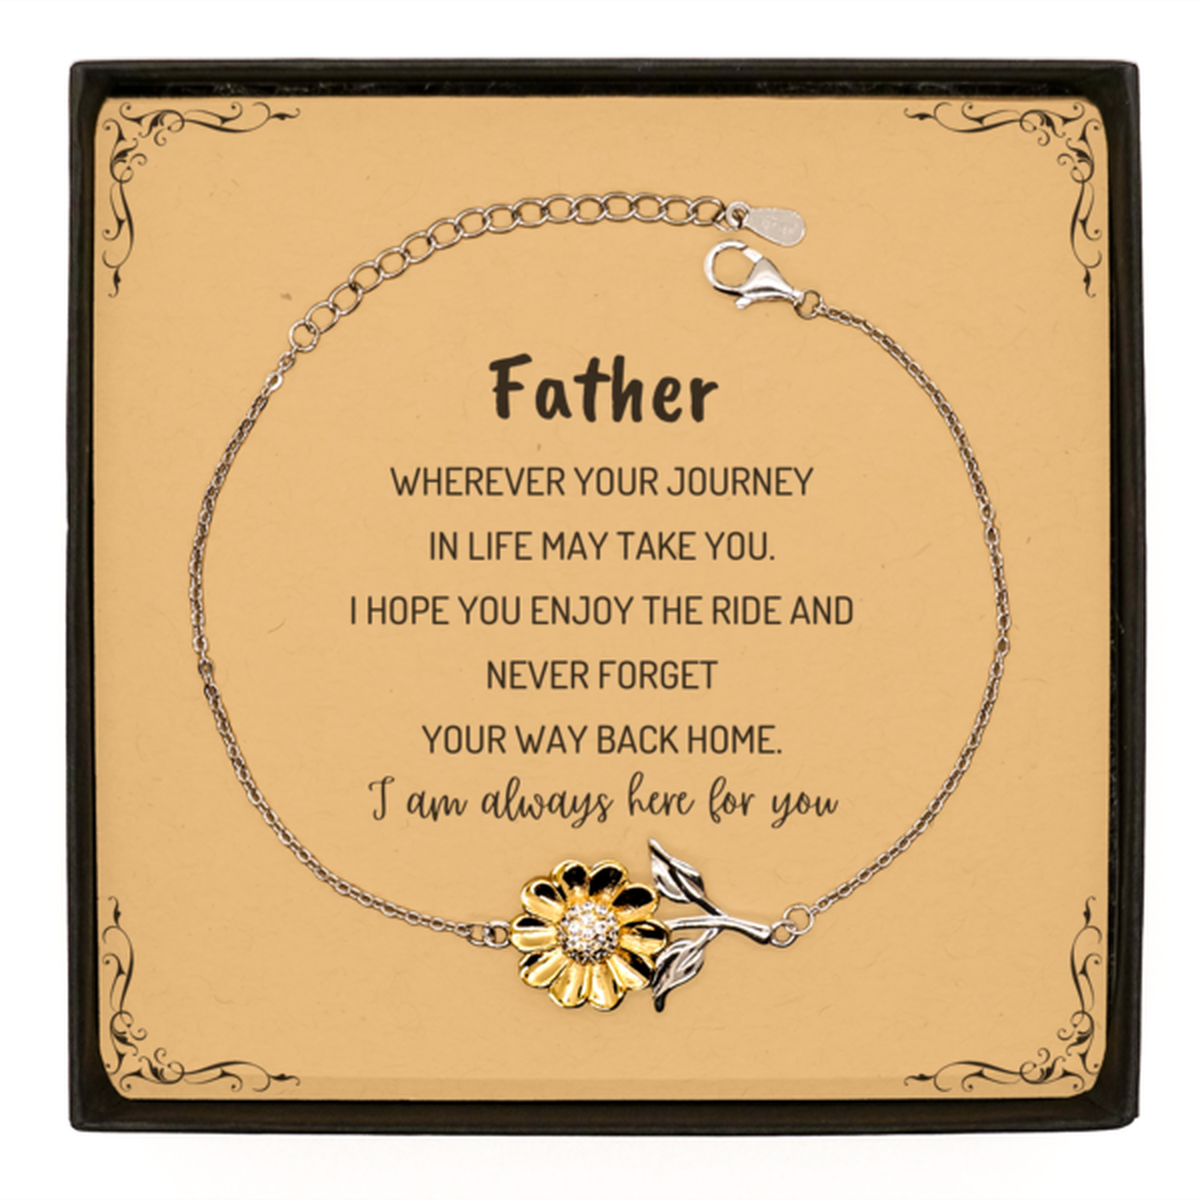 Father wherever your journey in life may take you, I am always here for you Father Sunflower Bracelet, Awesome Christmas Gifts For Father Message Card, Father Birthday Gifts for Men Women Family Loved One